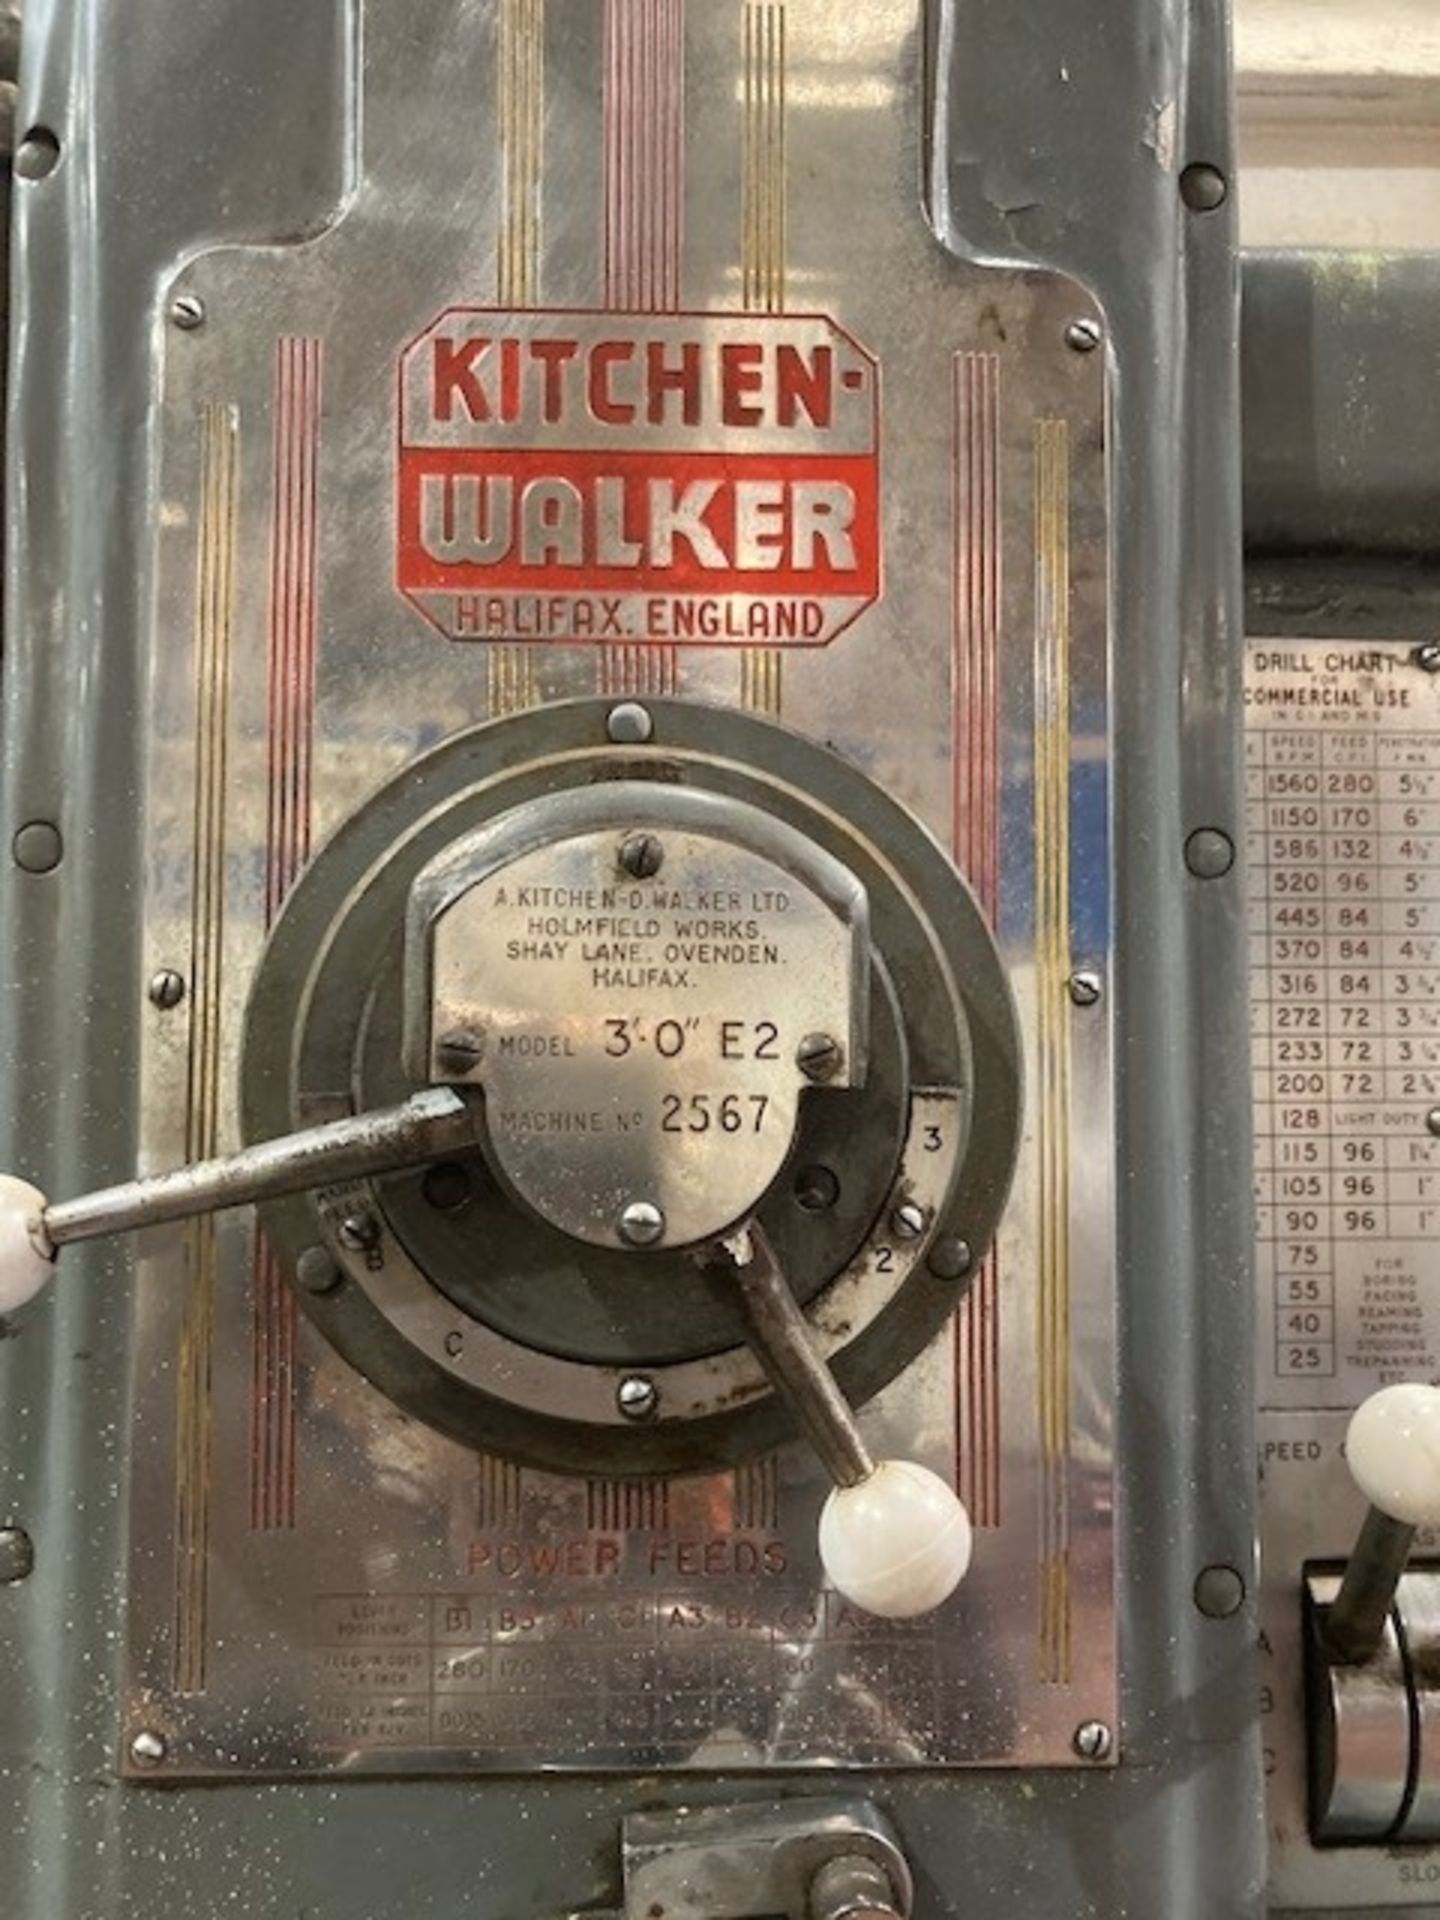 Kitchen and Walker 3’-0” E2 Radial Drill - Image 5 of 10